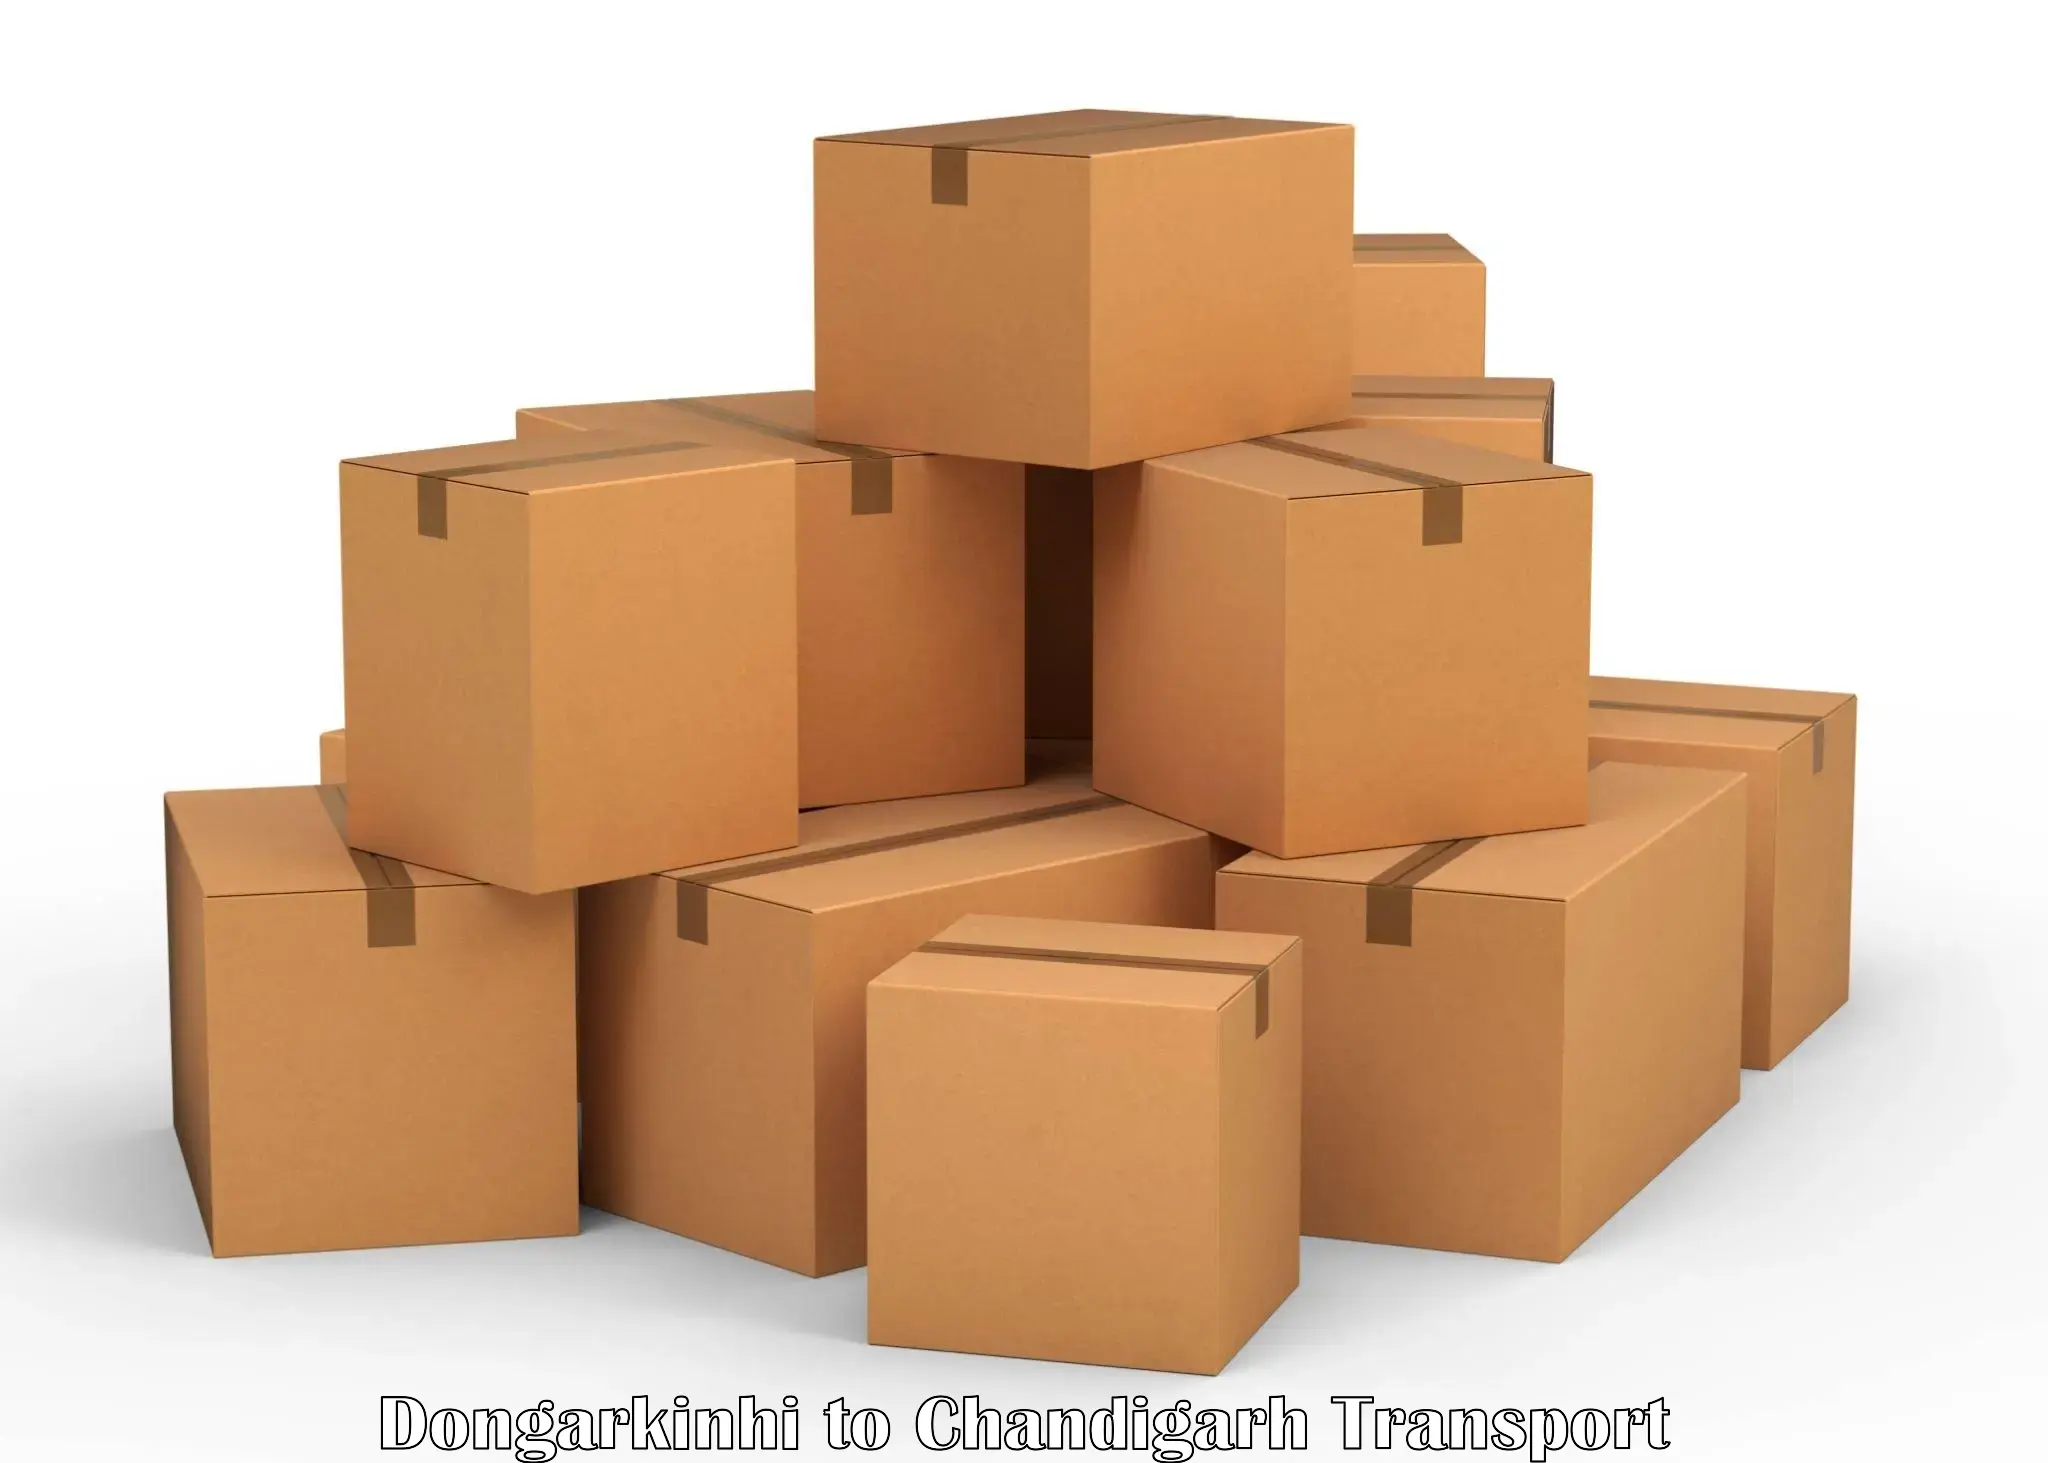 Shipping services in Dongarkinhi to Chandigarh